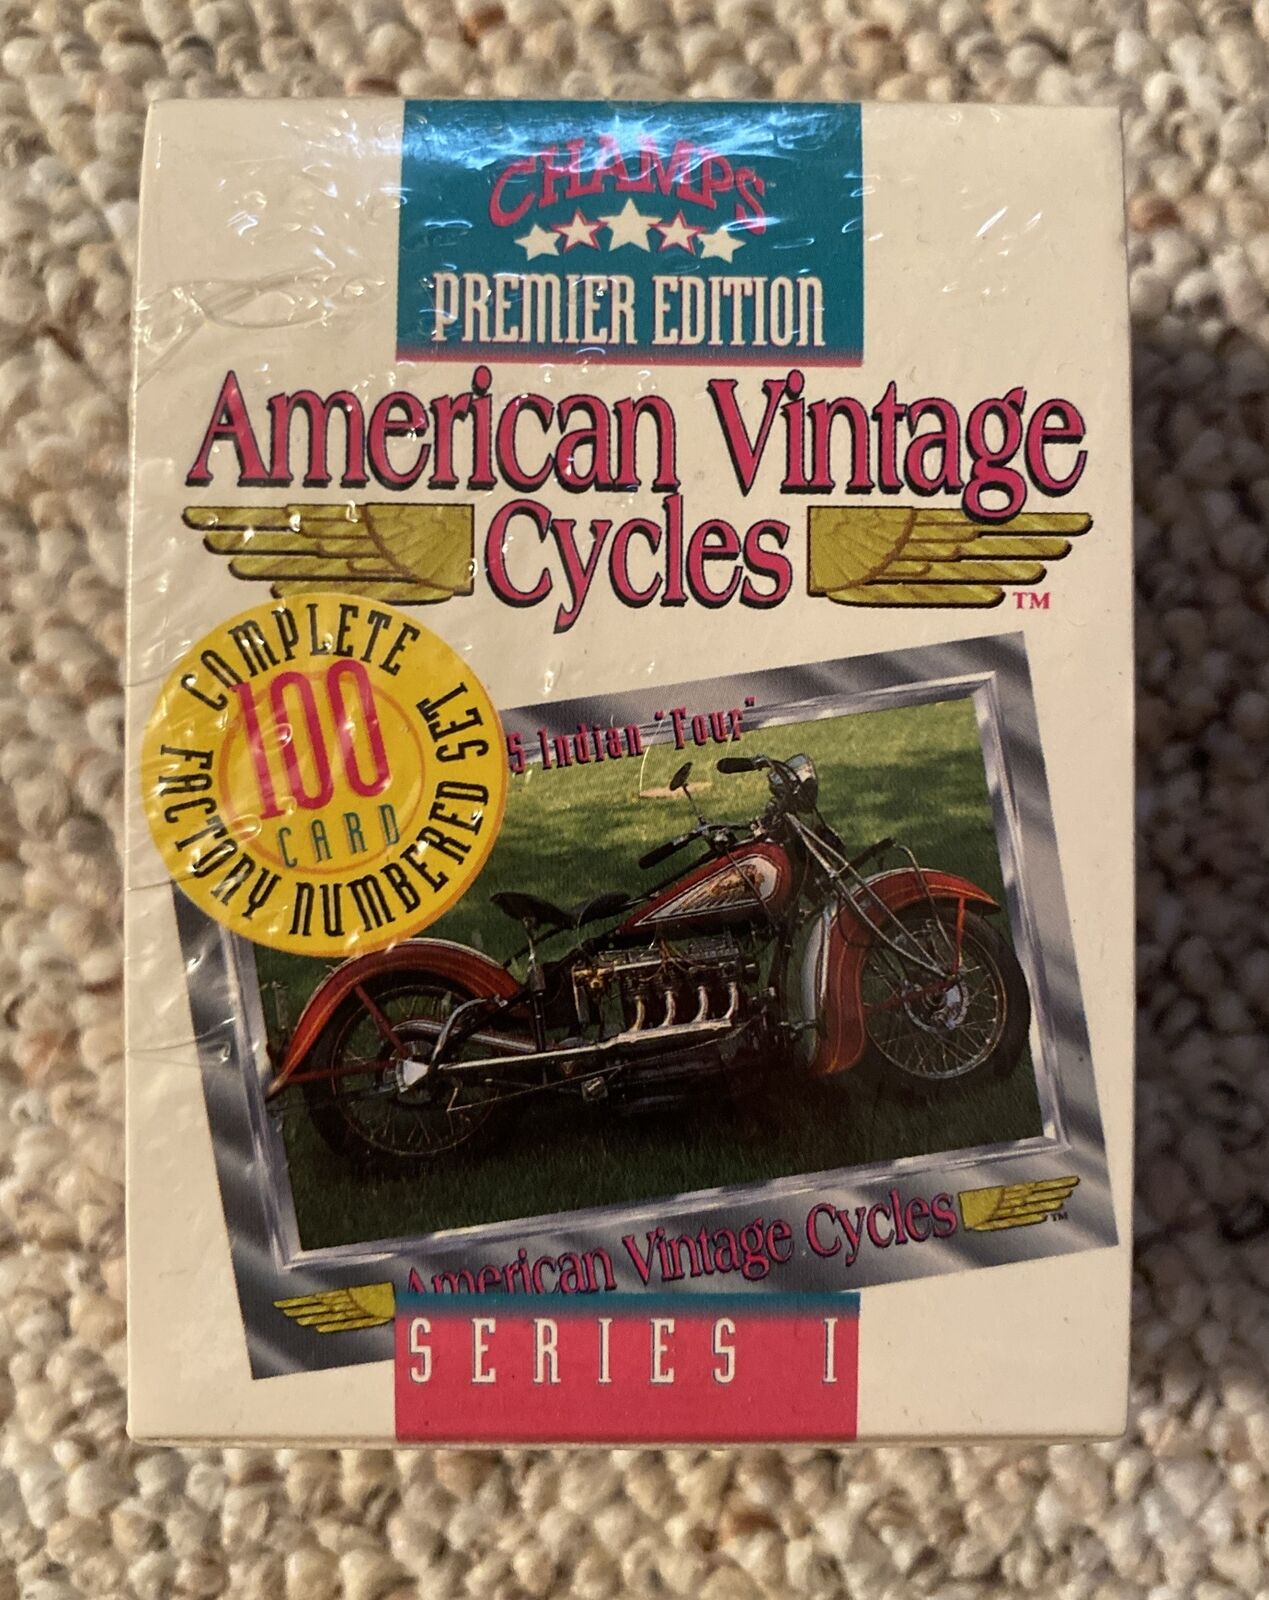 Sealed 1992 Champs Premier Edition Series 1 American Vintage Cycles Complete Set